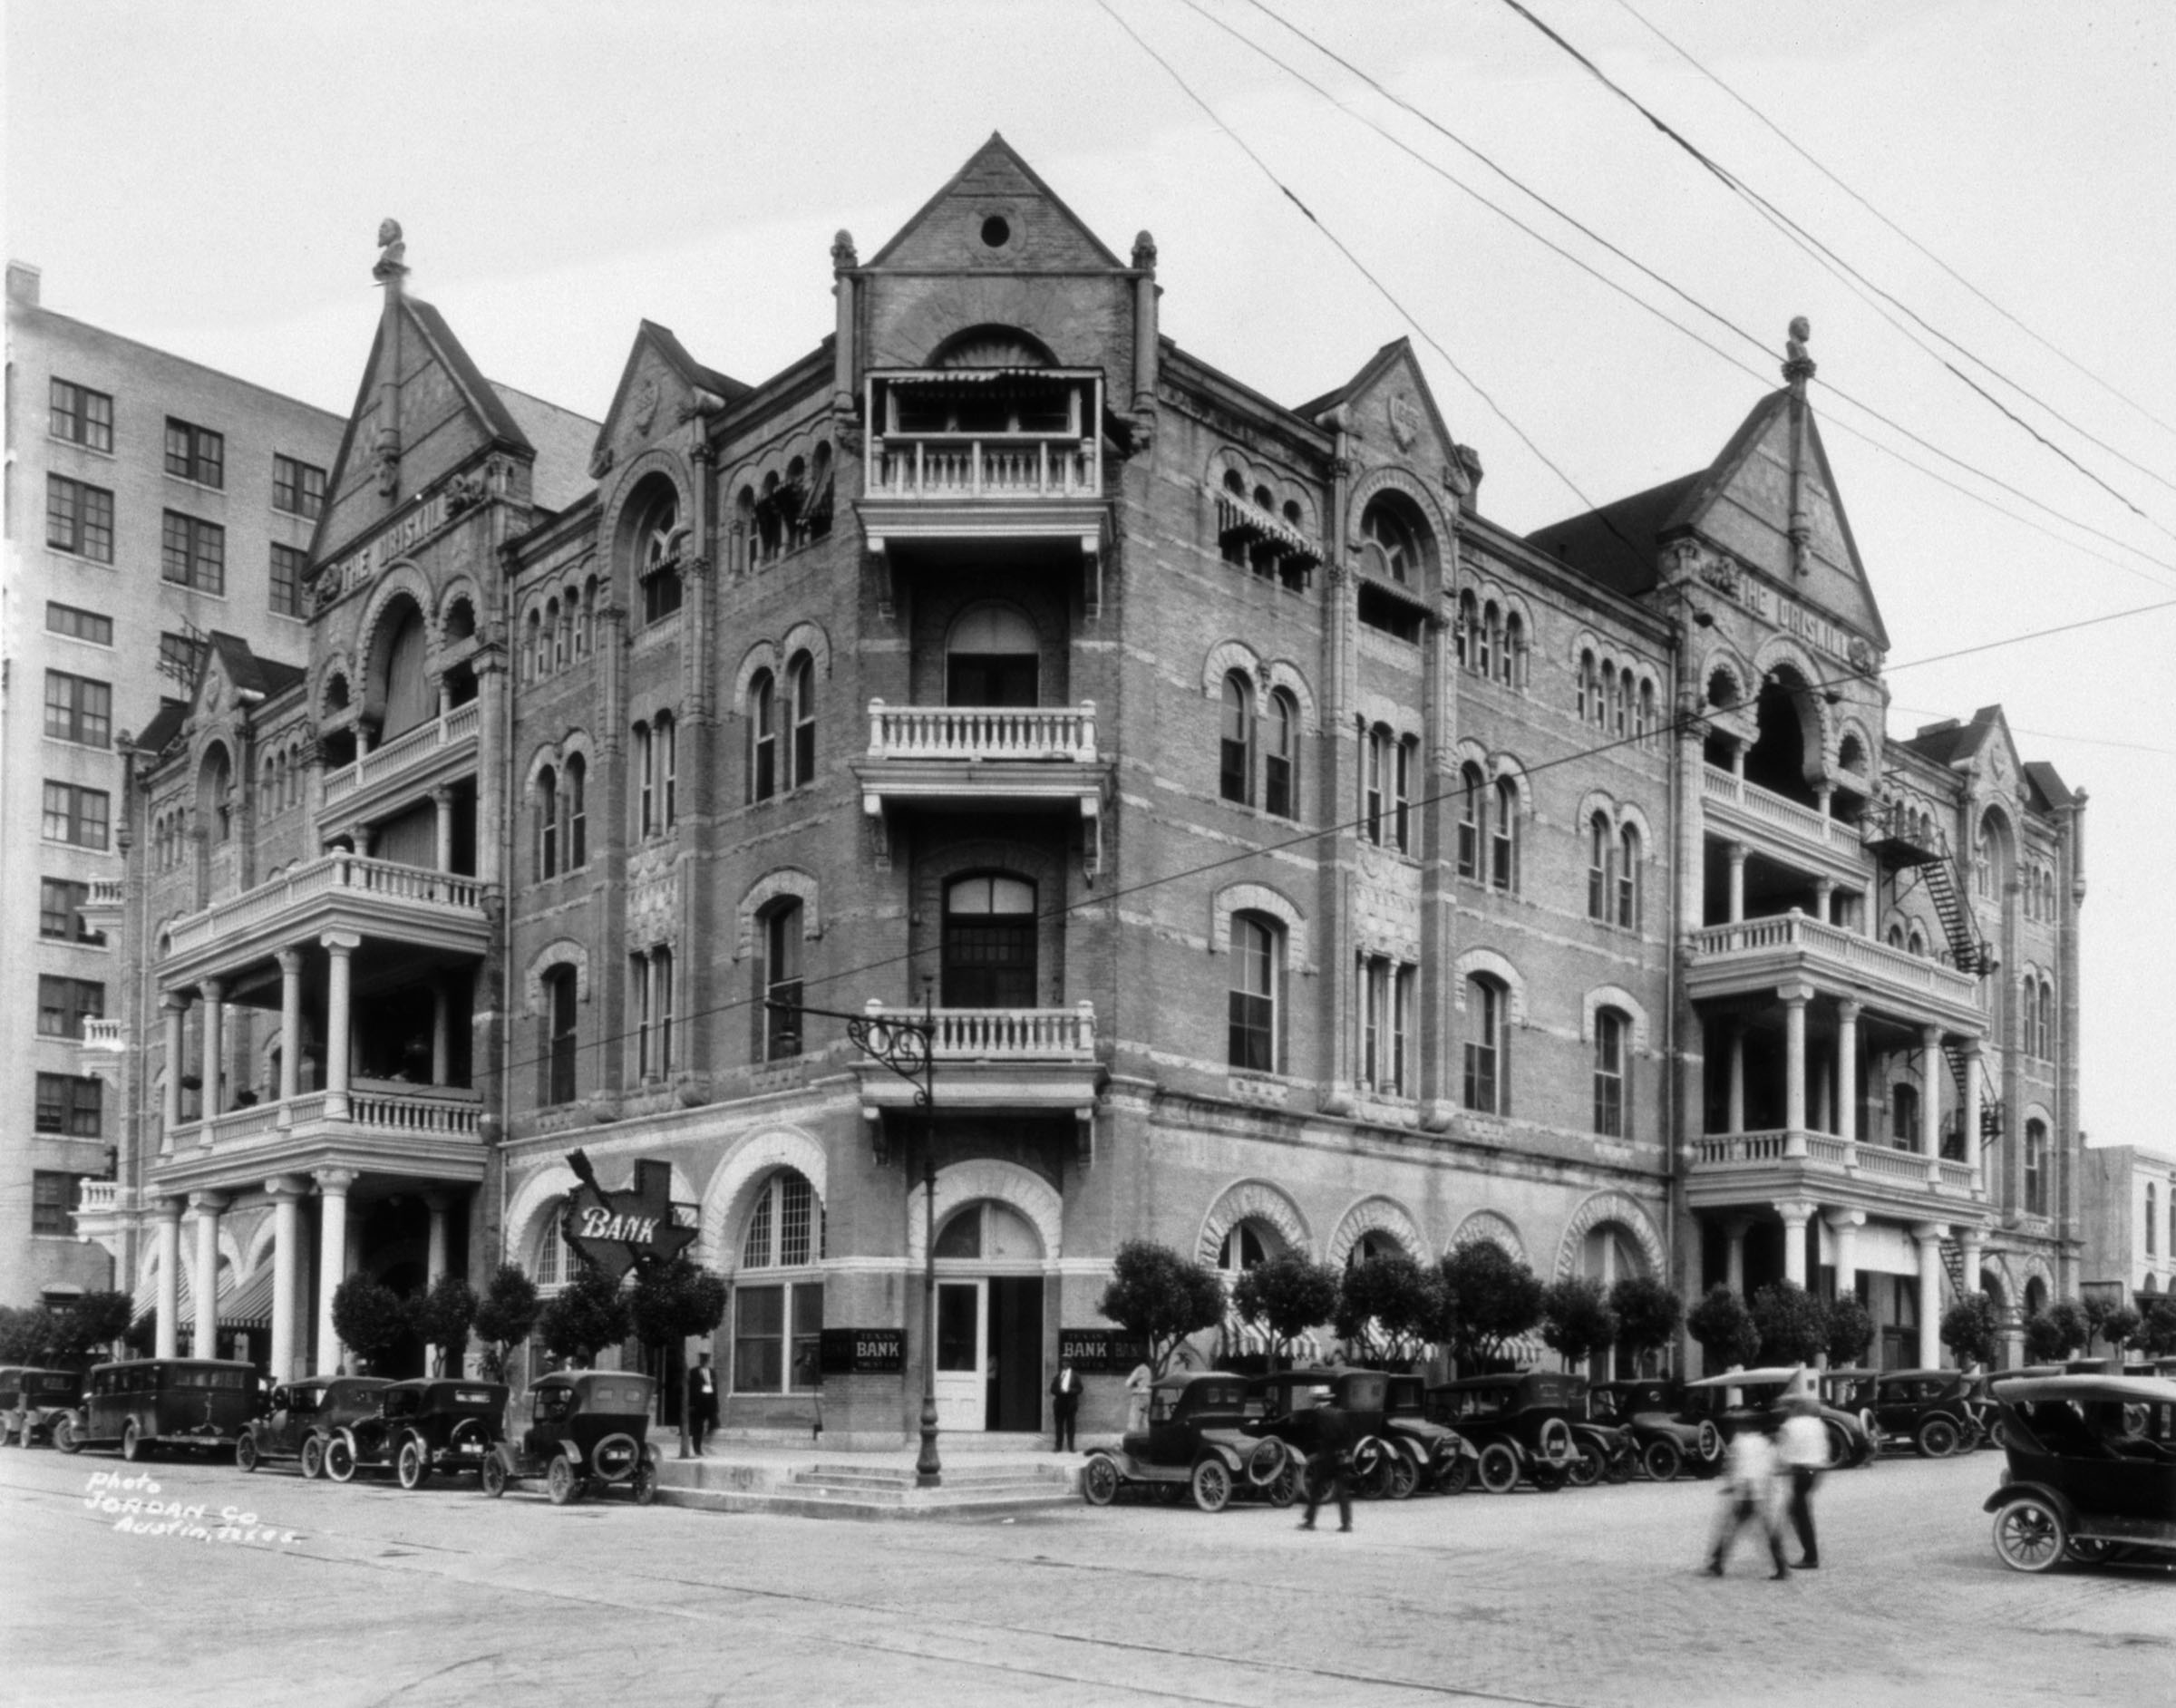 A black-and-white photo of the corner where the Driskill Hotel sits, with two people walking across the street and old cars parked along the curb.